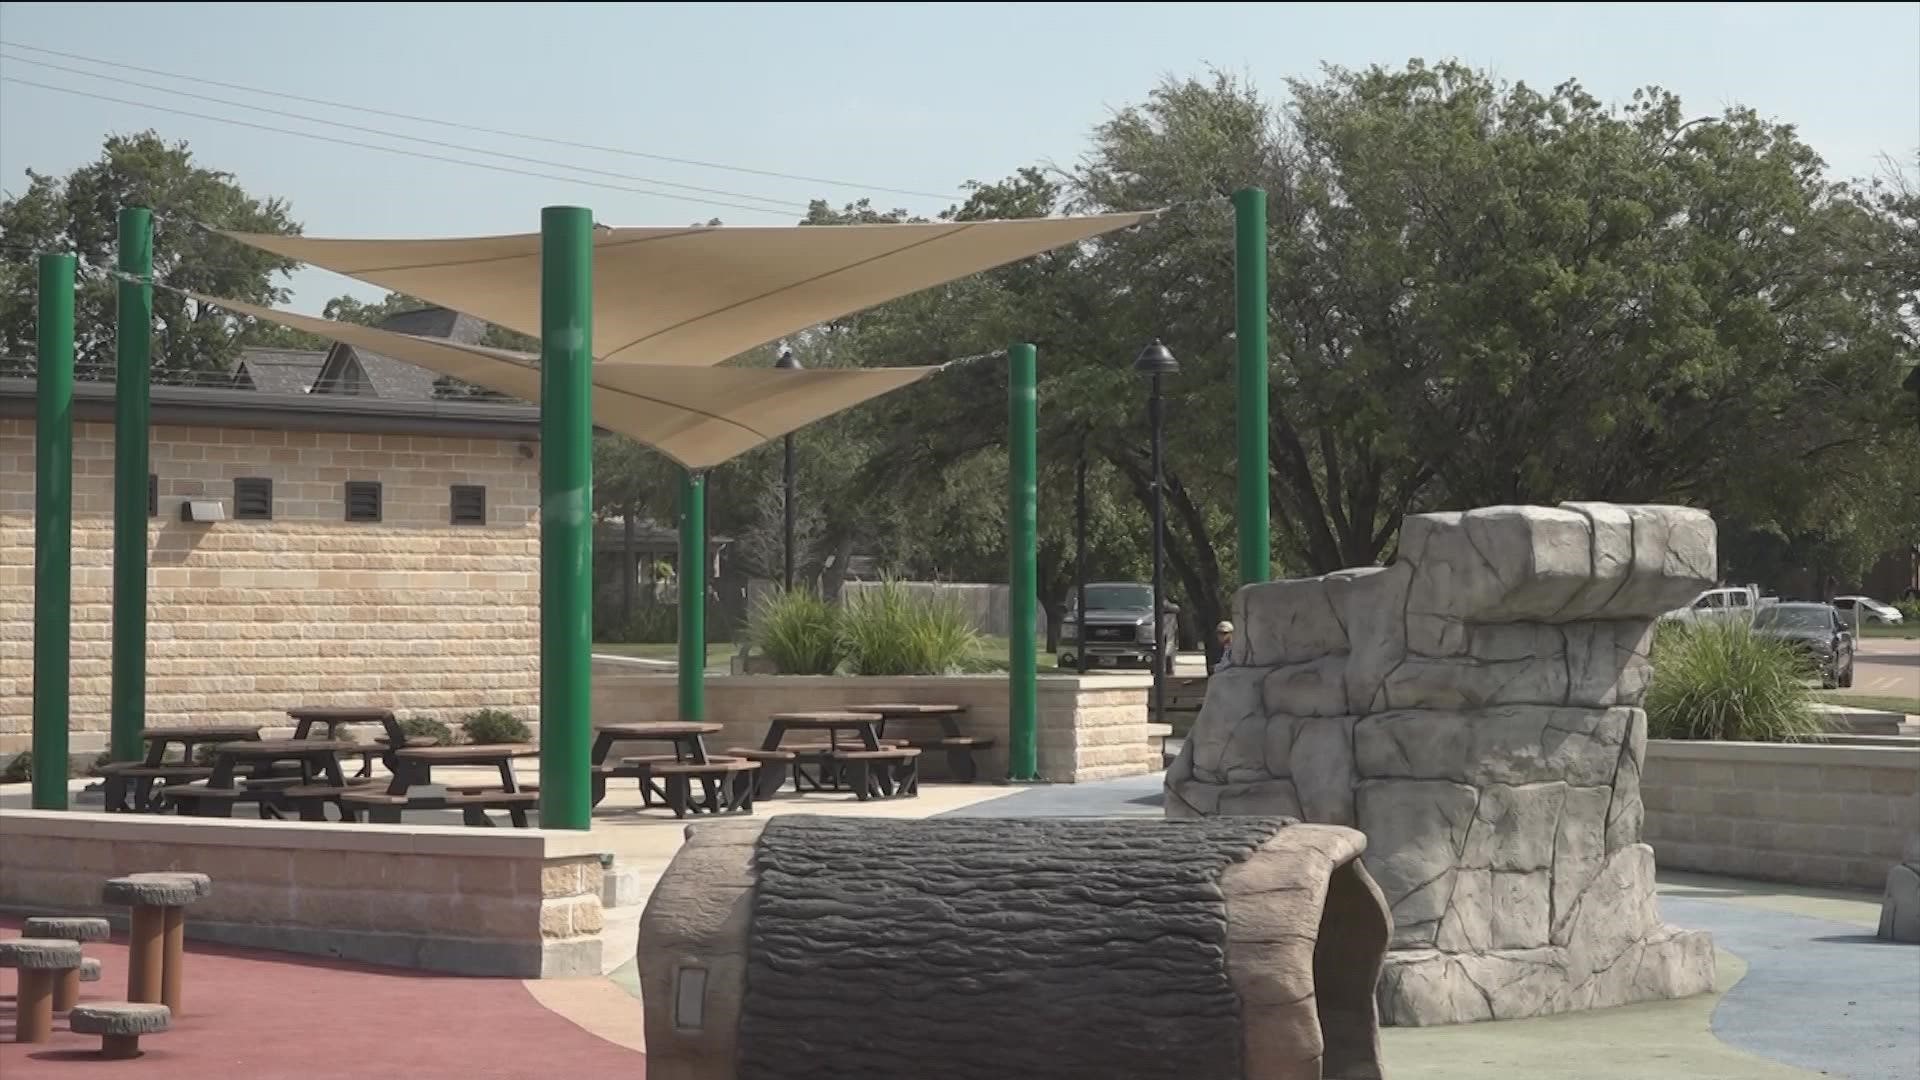 Taylor has multiple parks throughout the city, including the newly renovated Heritage Park. KVUE's Dominque Newland explains.